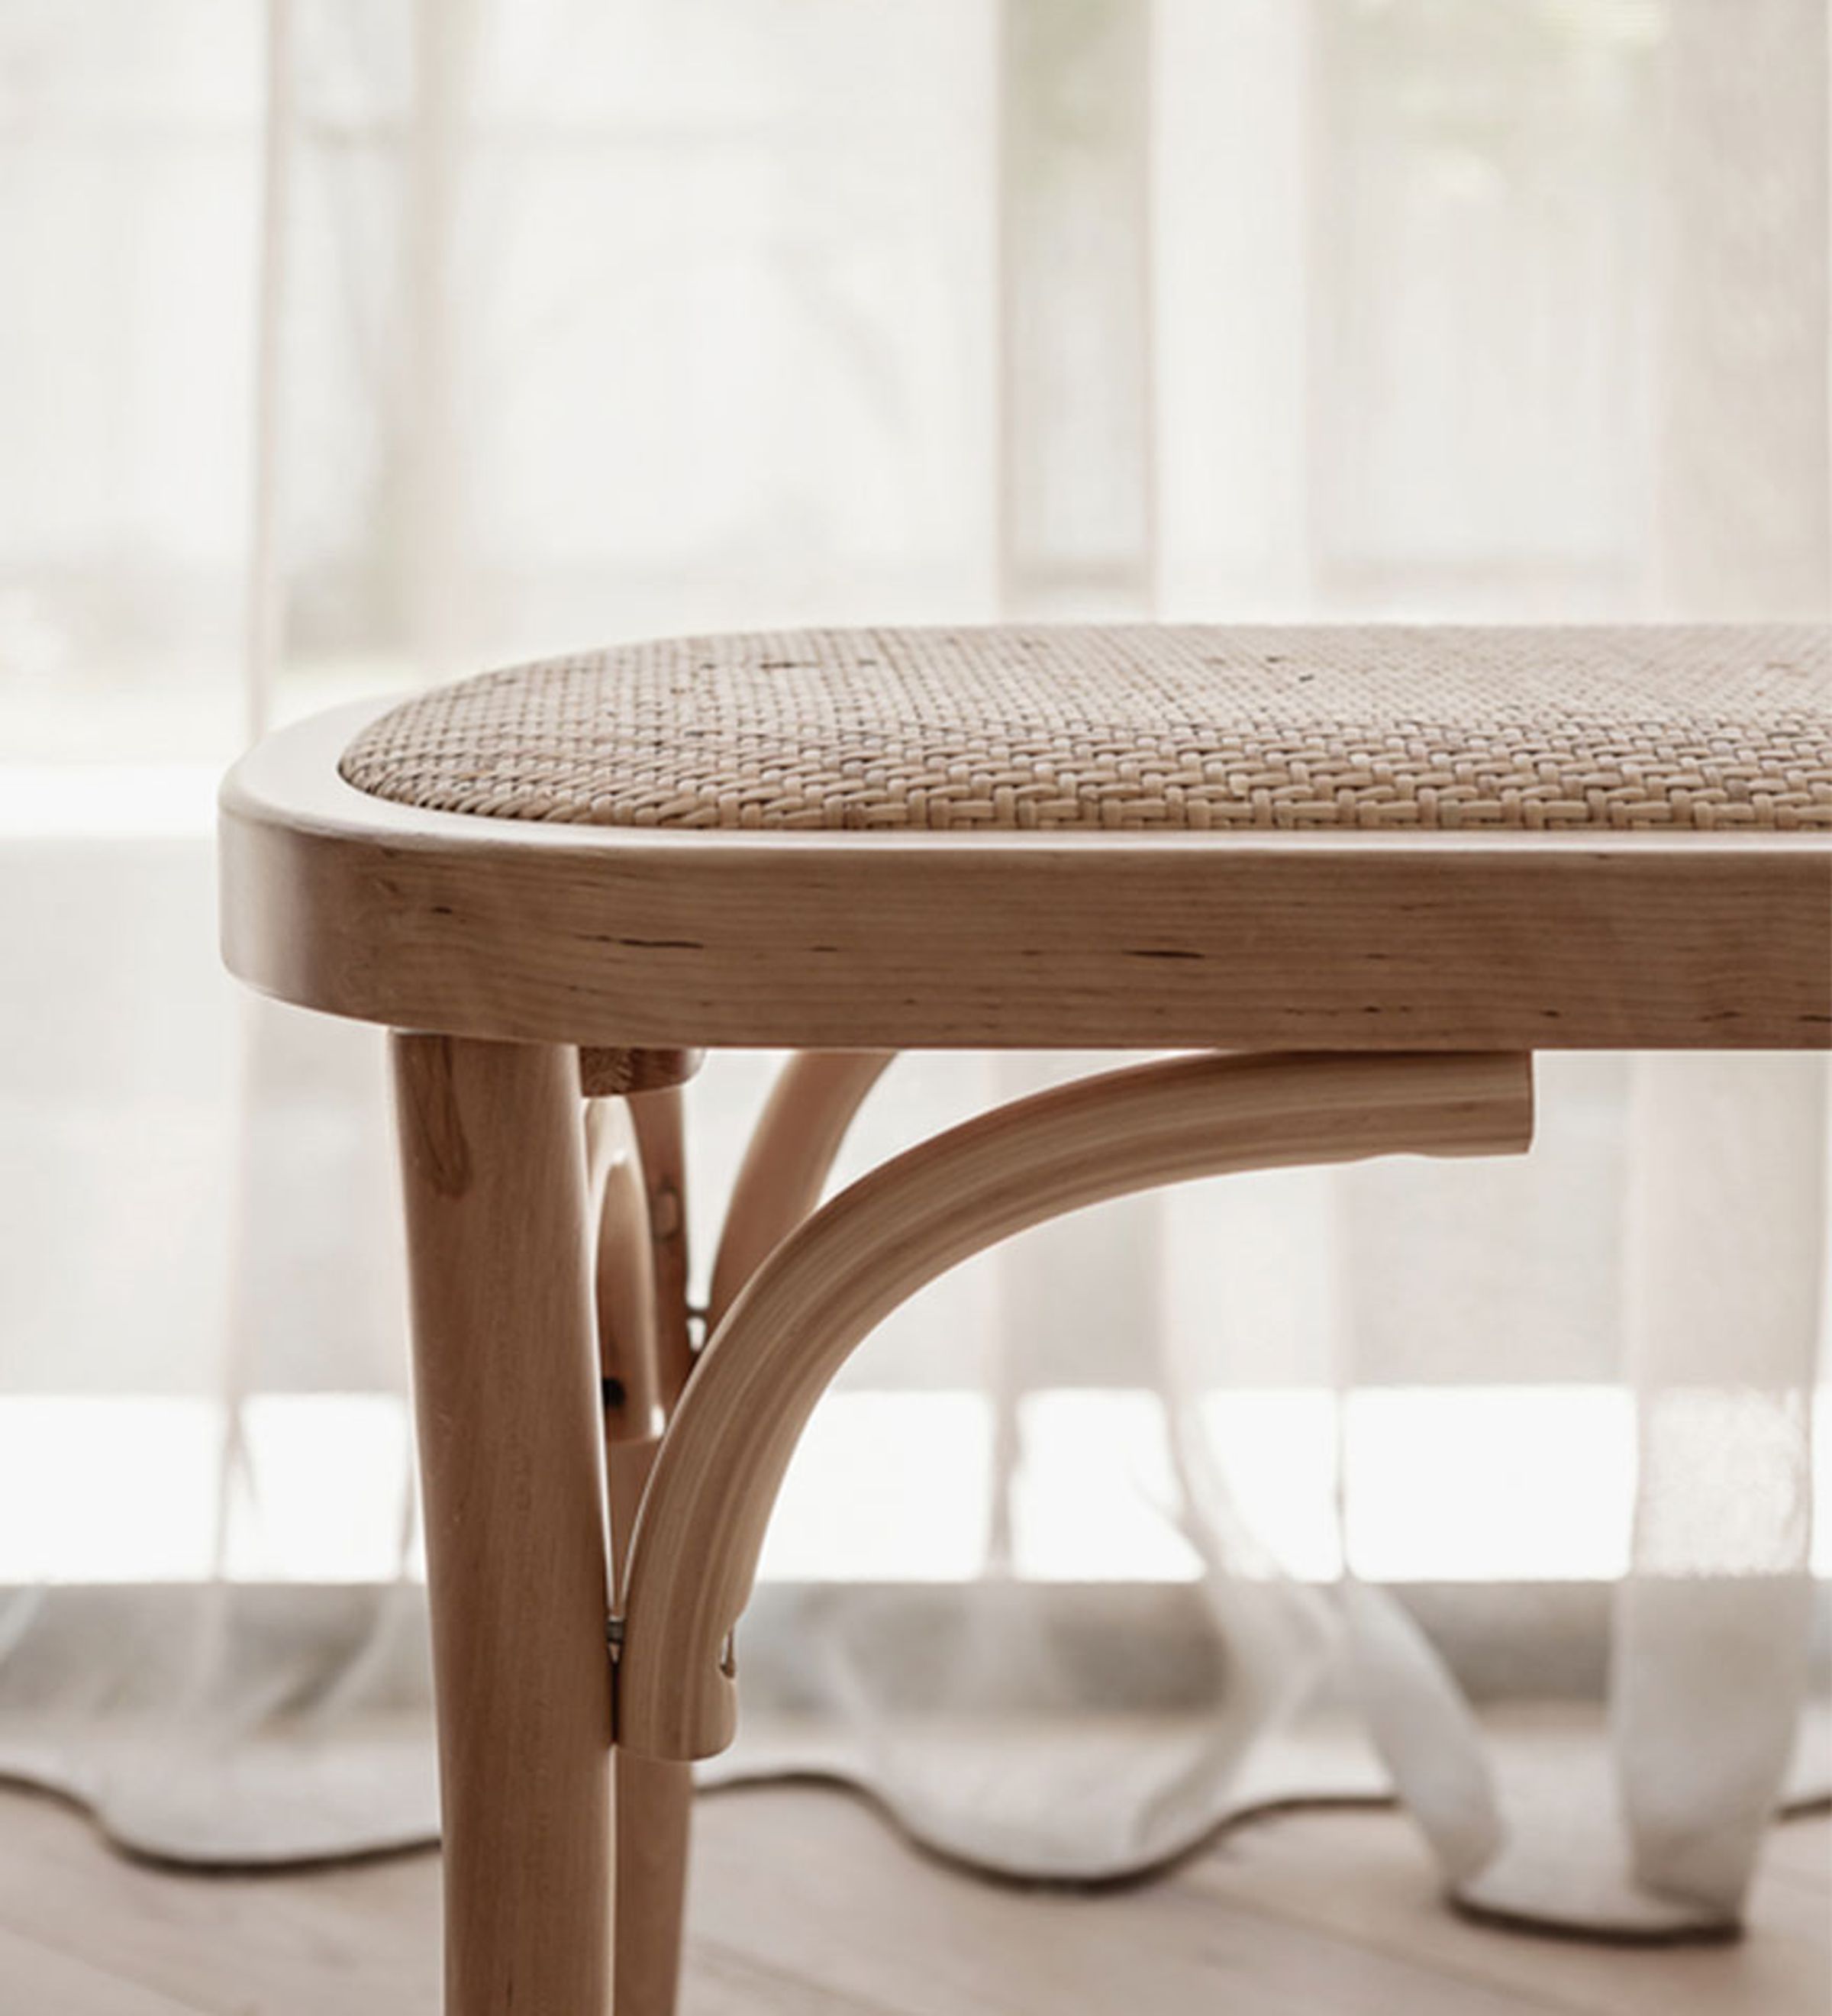 Close up view of a wooden seat with bamboo seat covering in front of a S wave white sheer curtains